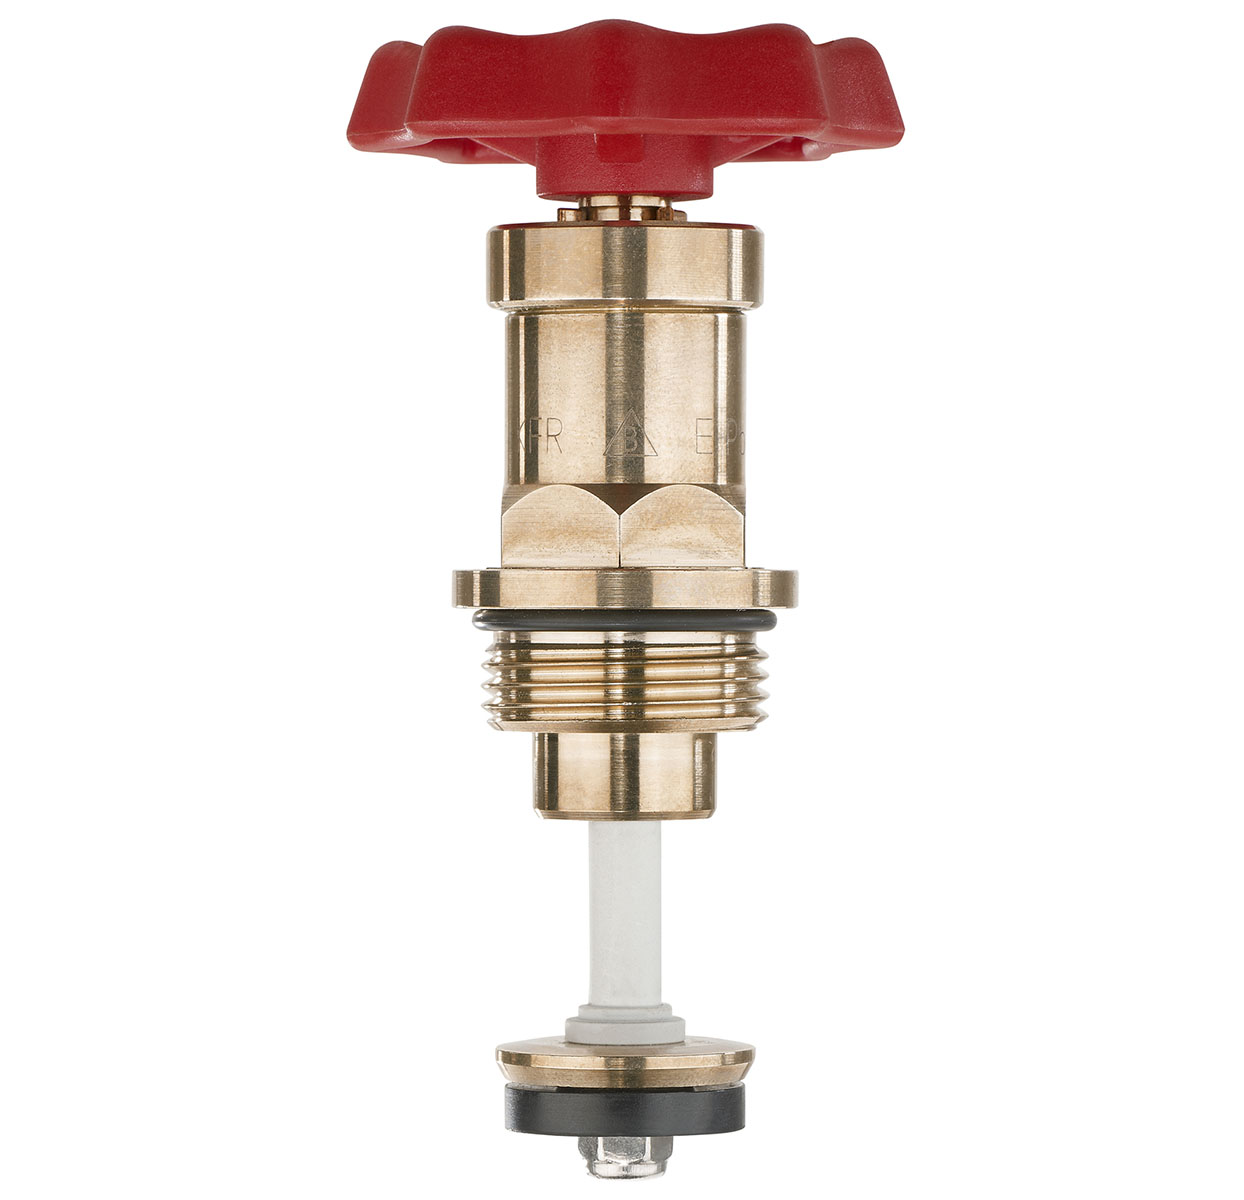 3215250 - Red-brass upper-part with grease chamber for Combined Free-flow and Backflow-preventer valves